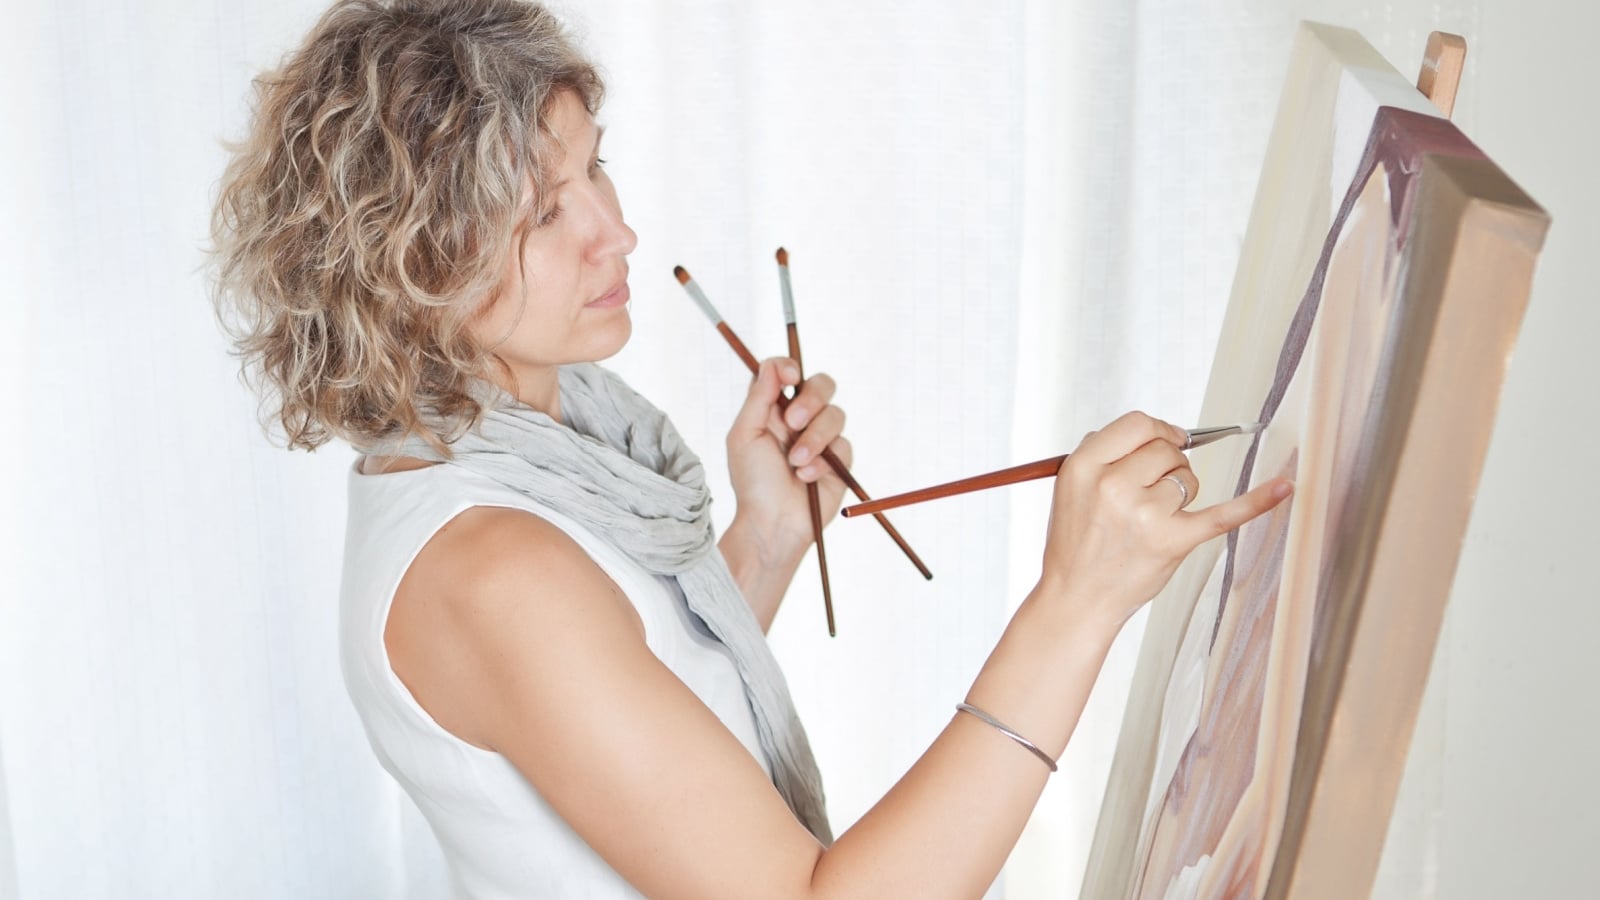 image credit: Serhiy-Stakhnyk/Shutterstock <p><span>Distracting yourself with a hobby can be a great way to decompress. Whether it’s painting, hiking, or playing an instrument, hobbies provide a mental break from politics. They also offer an opportunity to express yourself creatively. “Whenever politics gets too intense, I turn to my garden. It’s therapeutic,” shares a gardener in a discussion forum.</span></p>